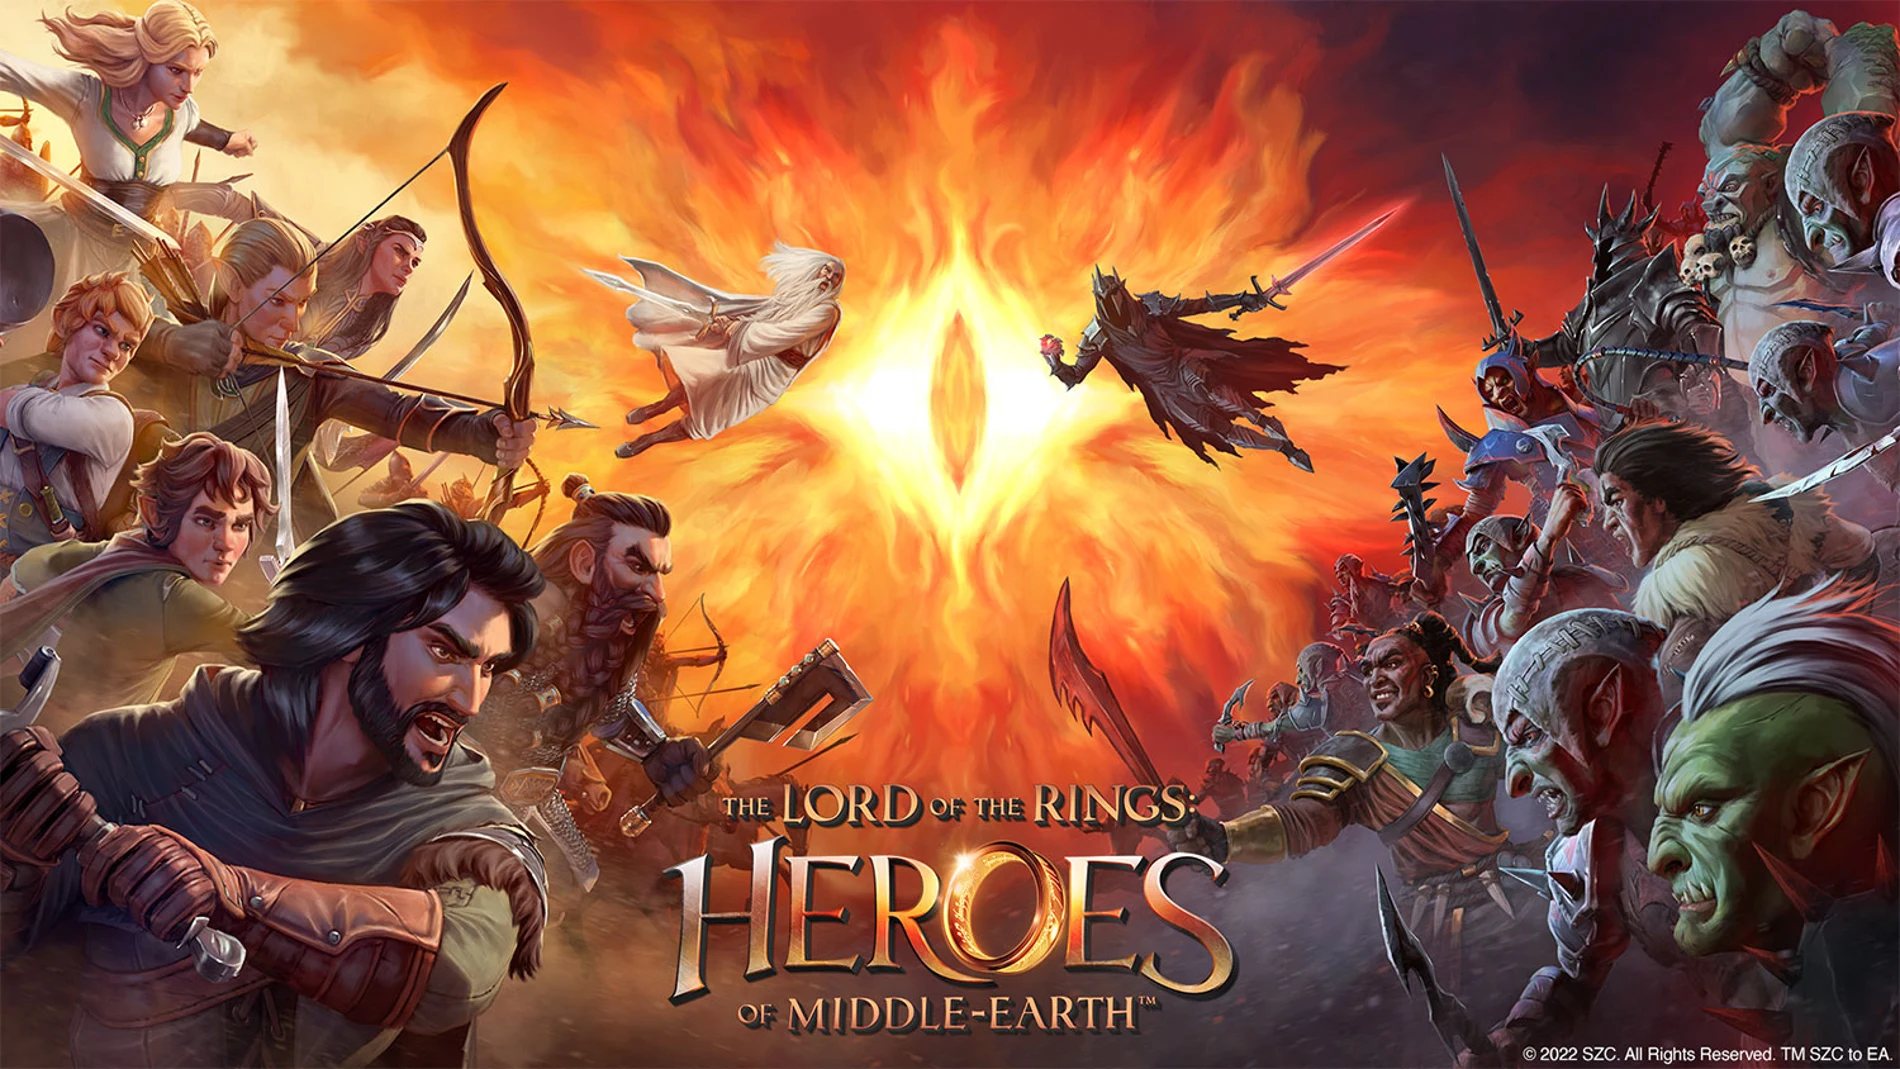 "The Lord of the Rings: Heroes of Middle-earth" ya puede descargarse para Android e iOS.